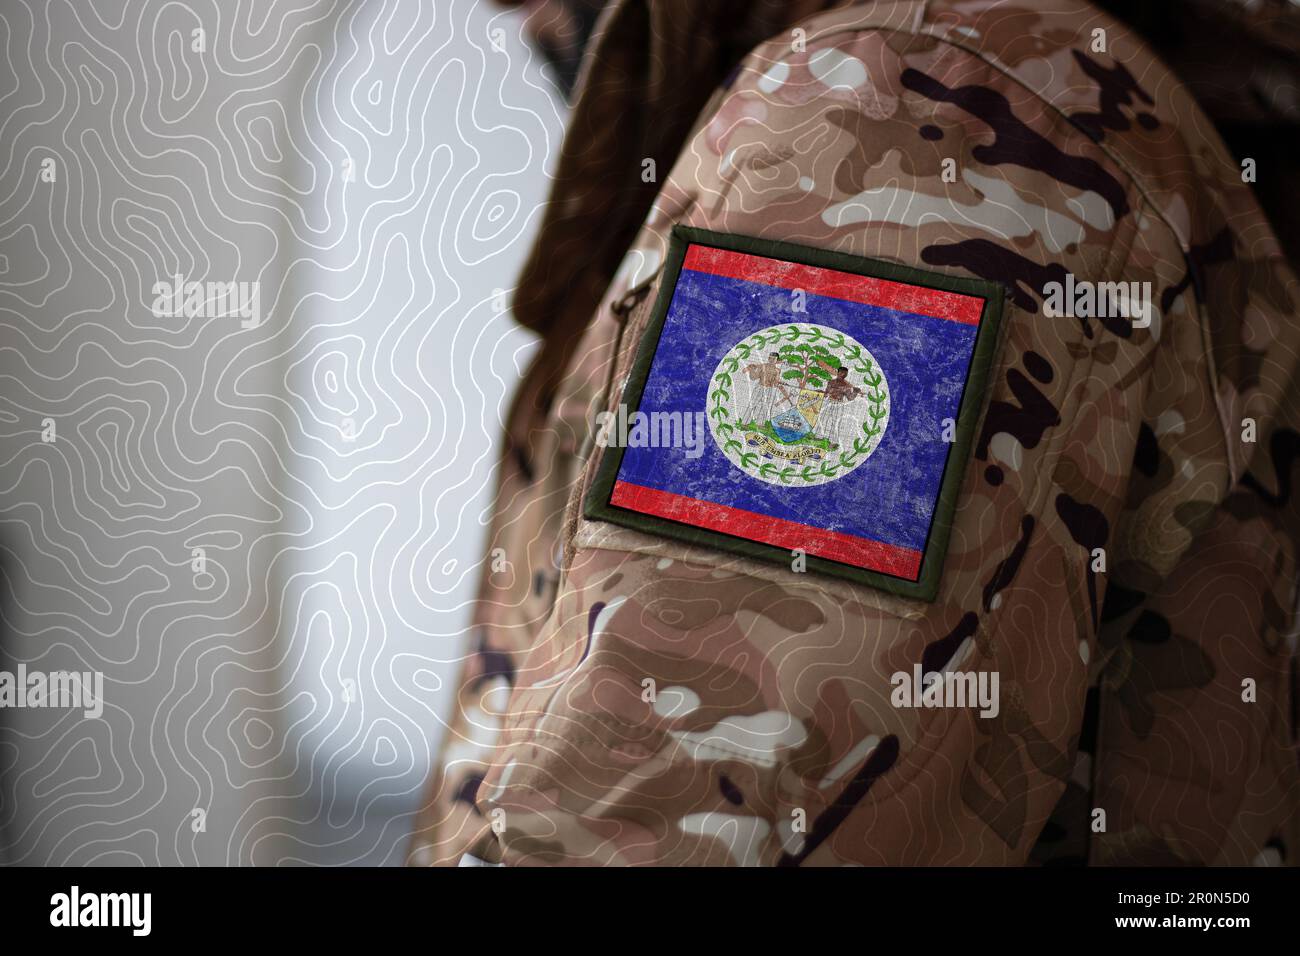 Us Flag And Us Army Patch On Military Uniform Stock Photo - Download Image  Now - American Flag, Arm, Army - iStock